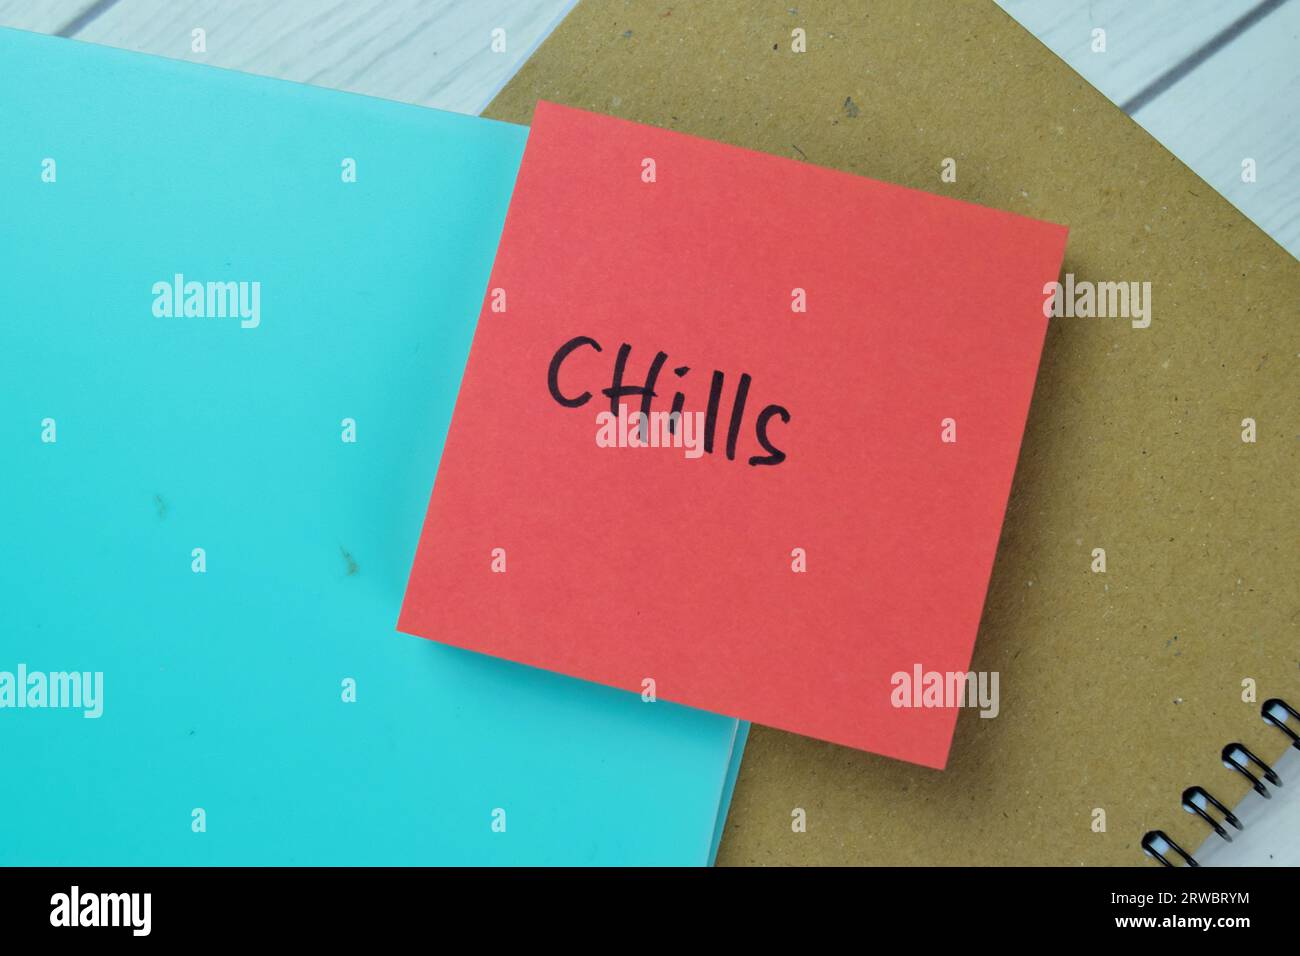 Concept of Chills write on sticky notes isolated on Wooden Table. Stock Photo